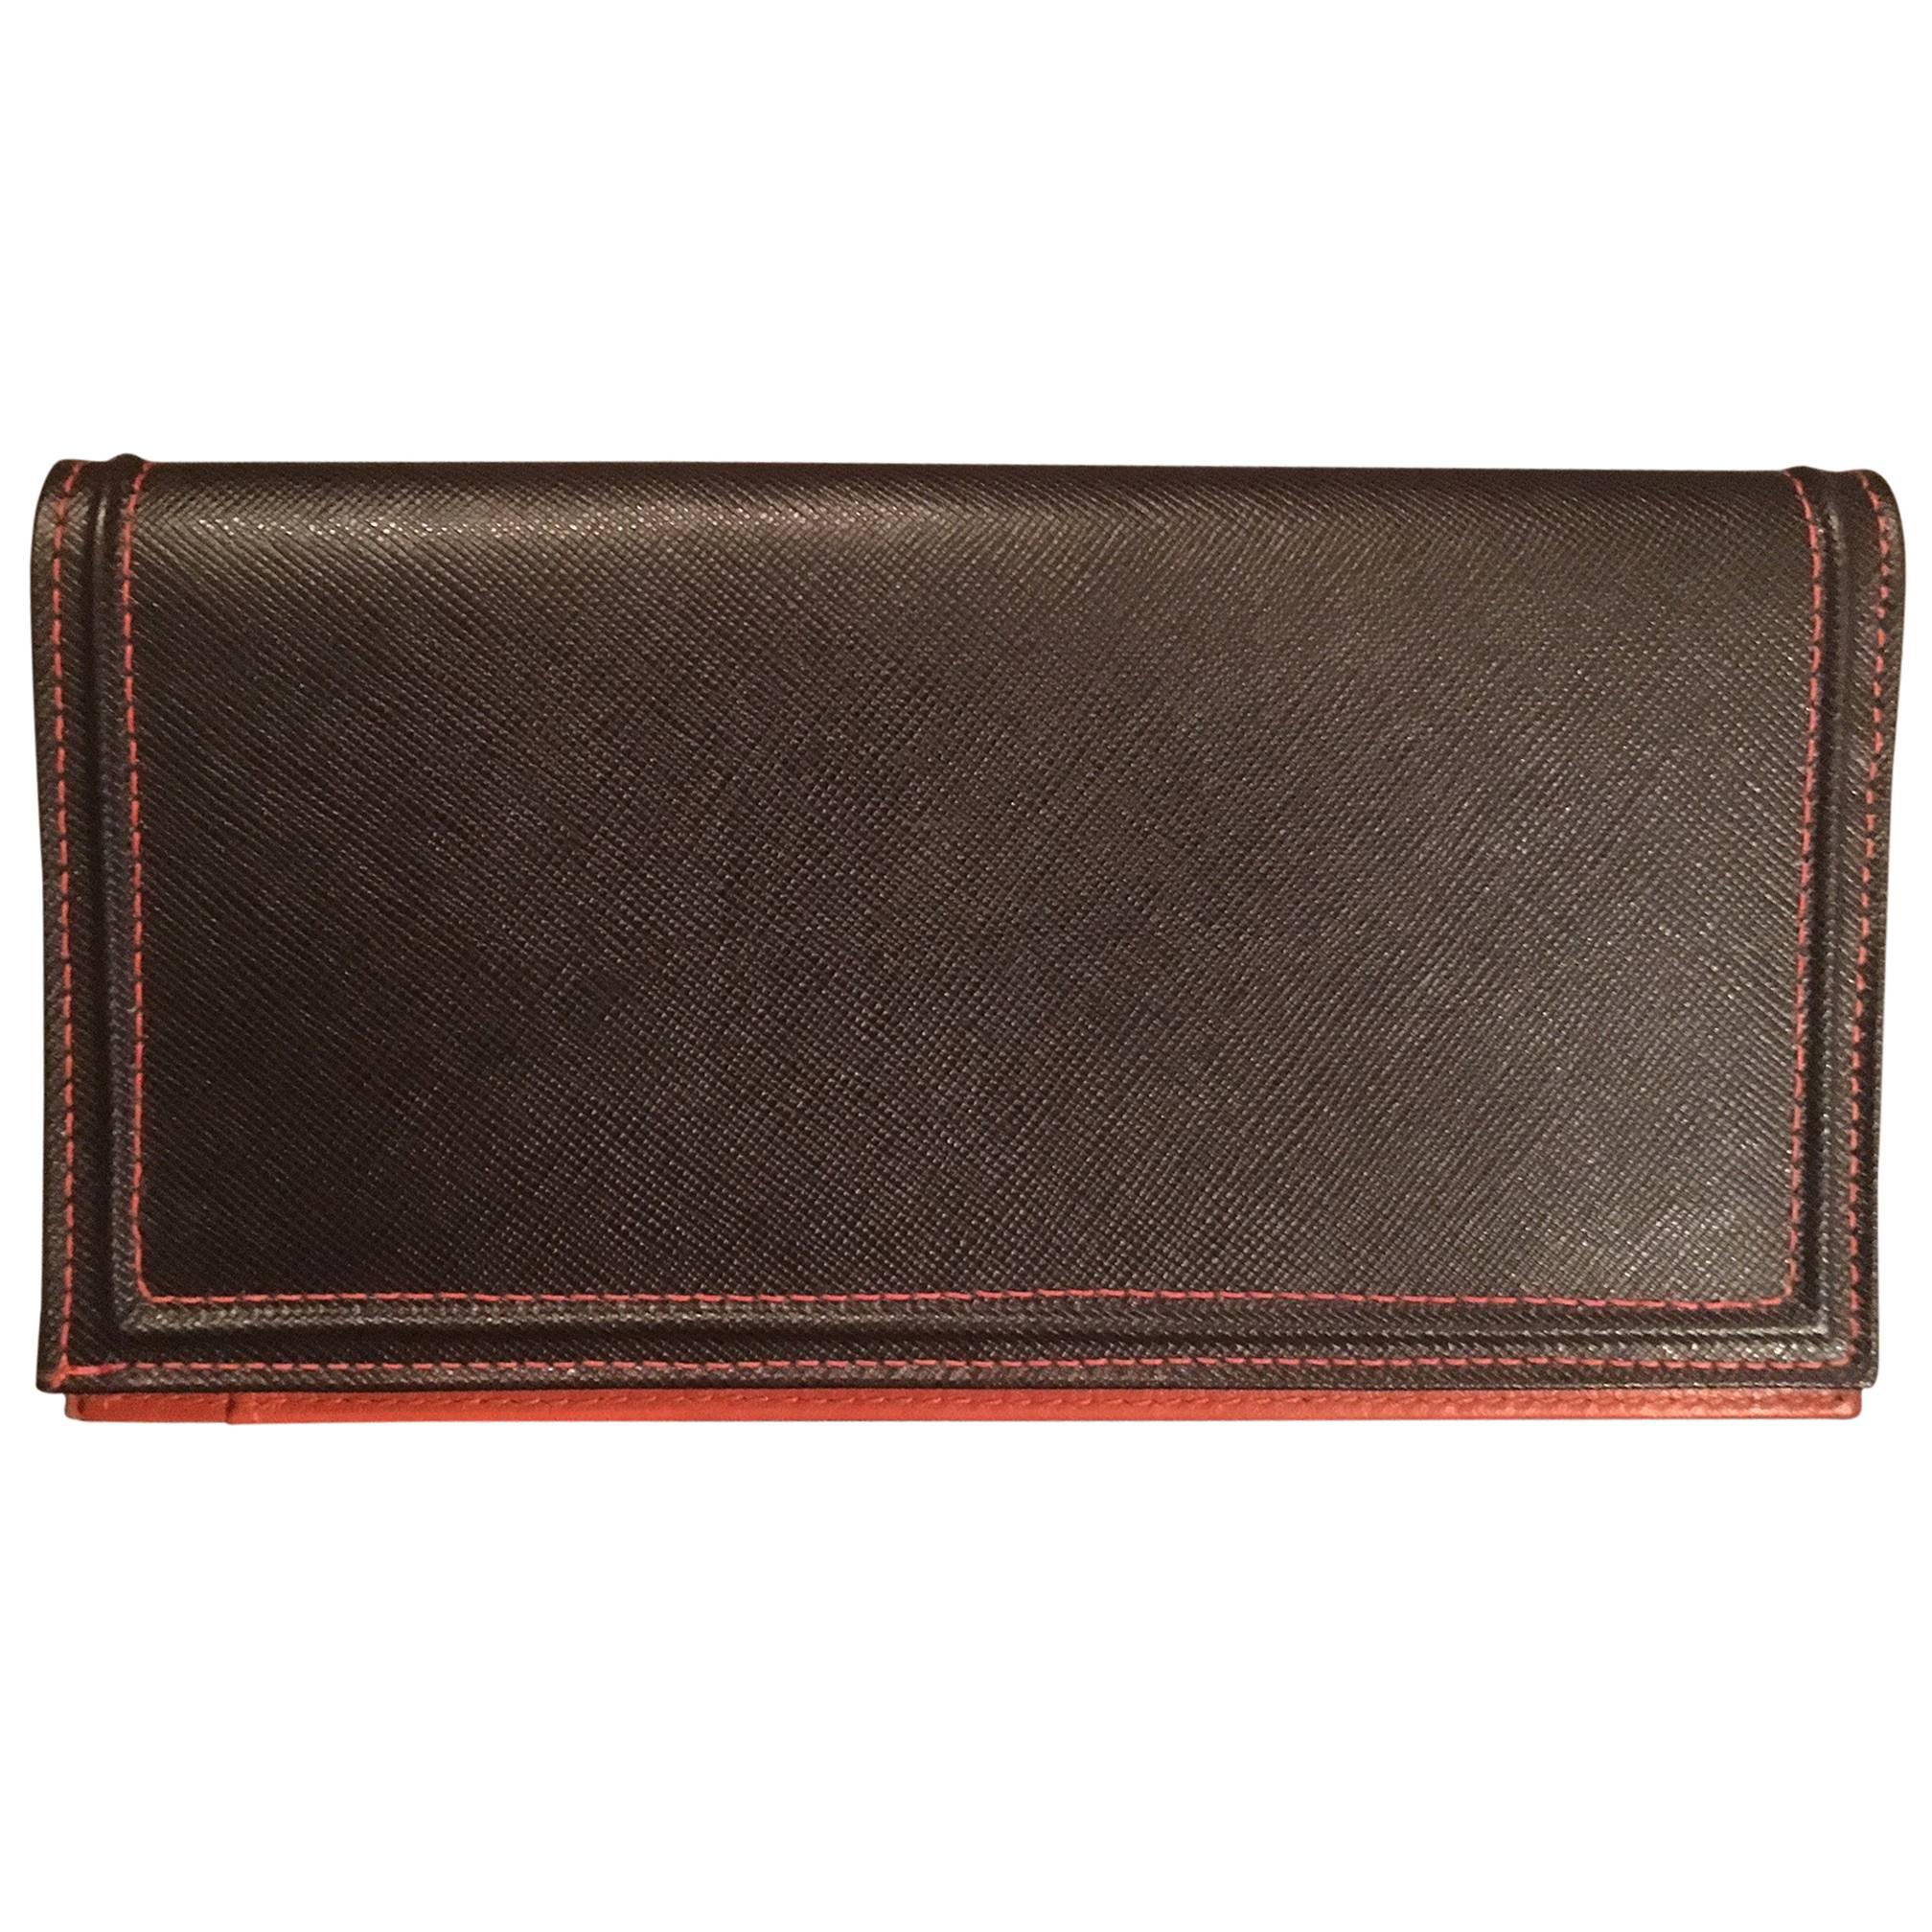 Etro Wallet For Sale